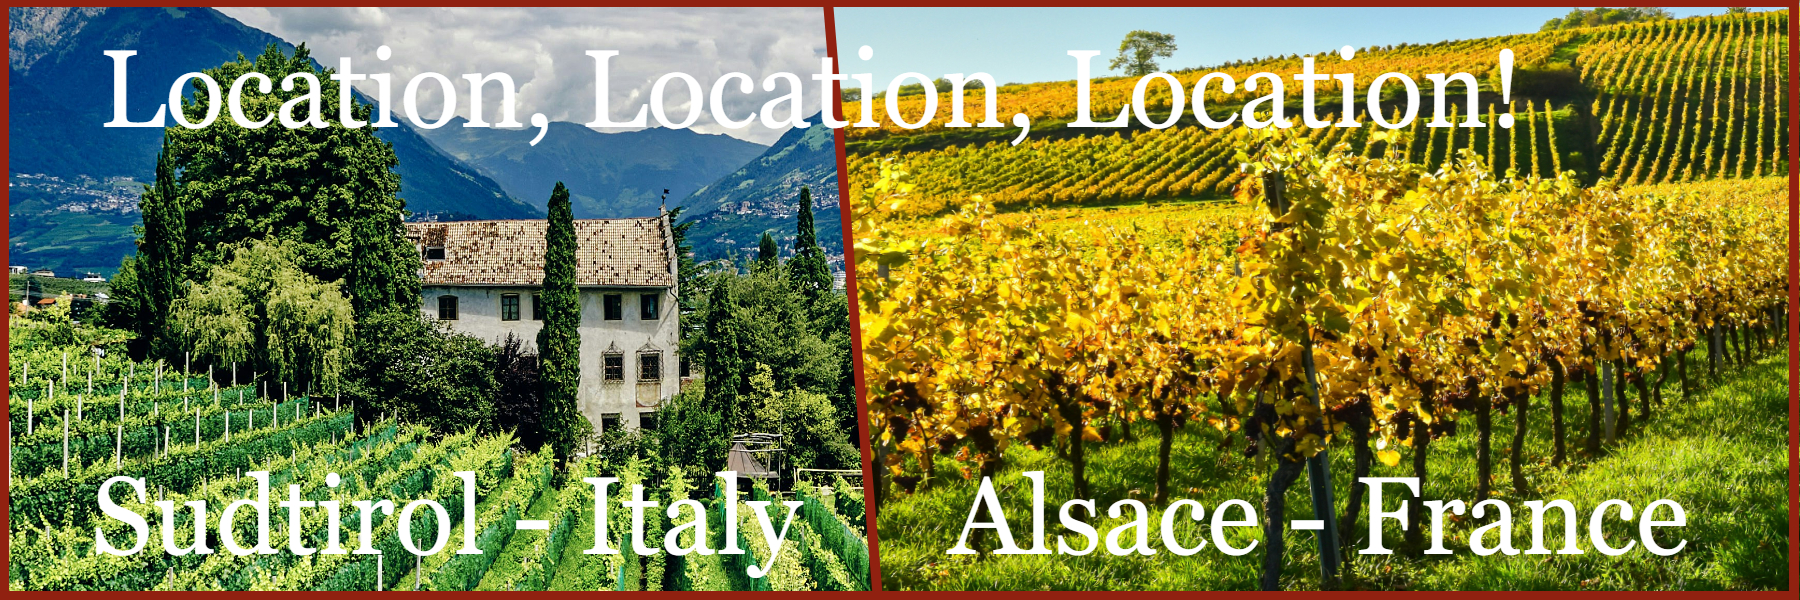 Terroir: View Alsace wines at Frazier's